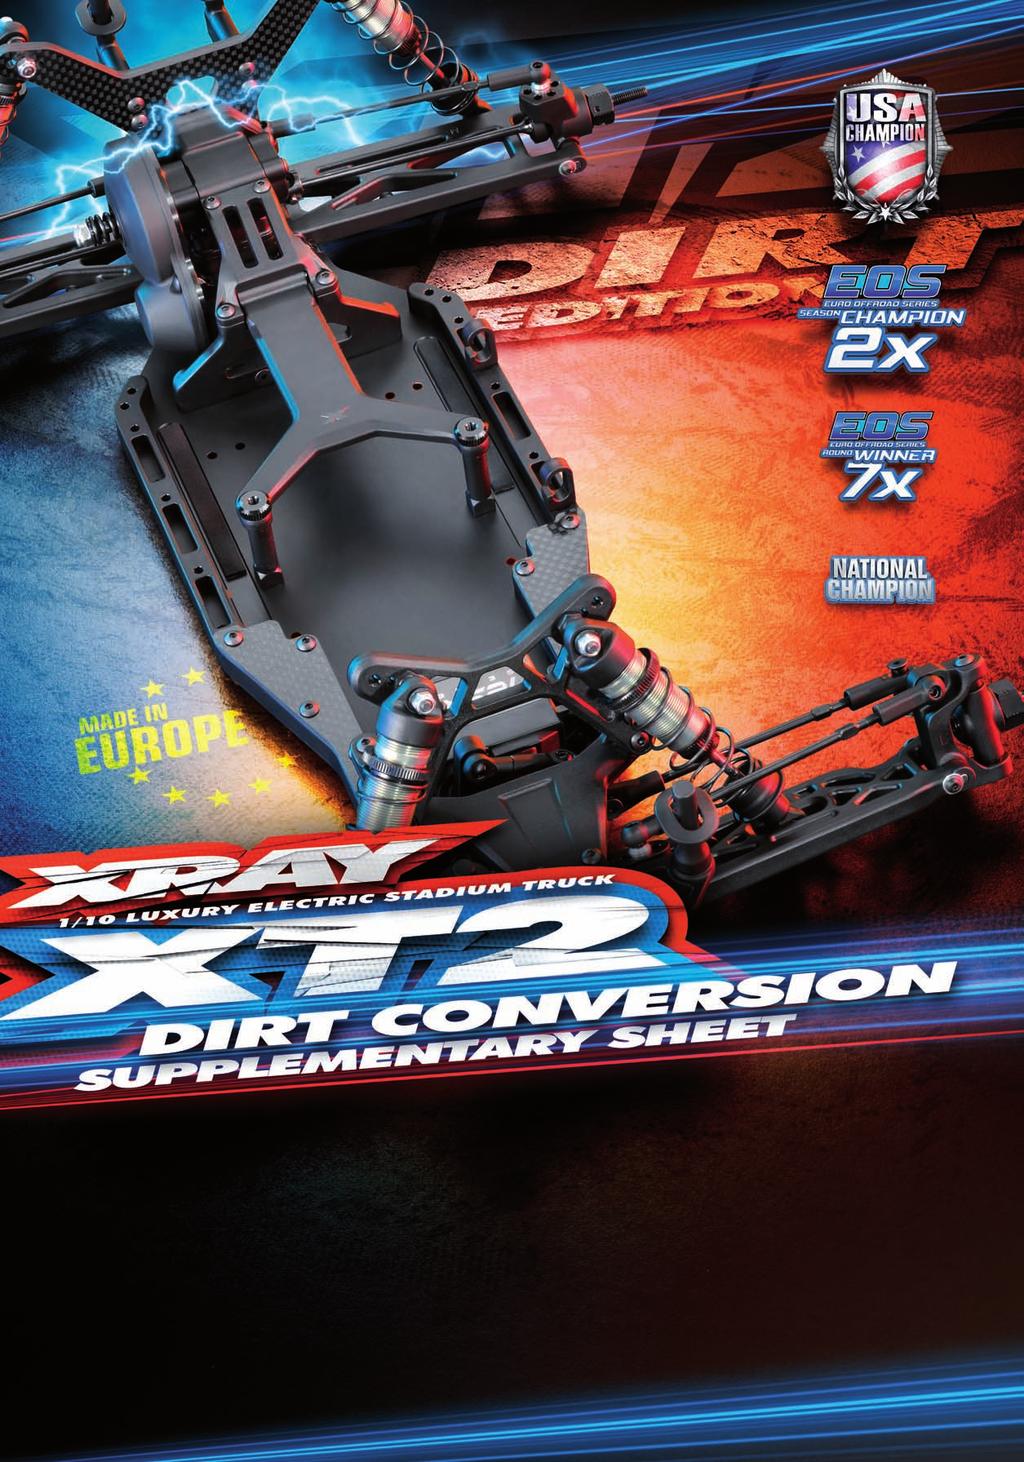 Use this XT2 Dirt Conversion Supplementary Sheet along with standard XT2 Instruction Manual and also XT2 18 Supplementary Sheet. Parts included in Bag 8: 303141 SHIM 3x5x1.